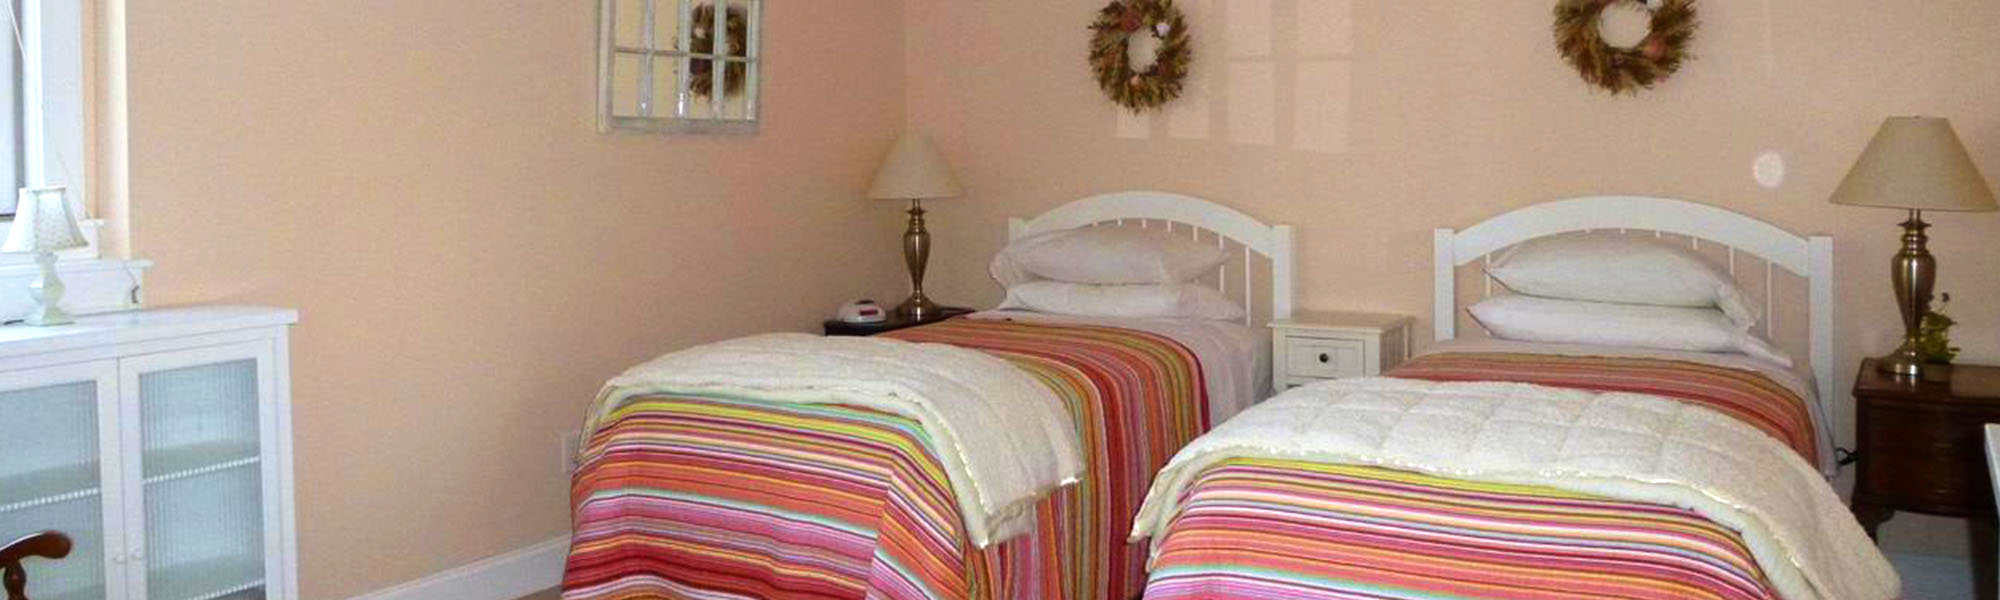 Offering cozy beach suites in Wellfleet, MA, that you are sure to love